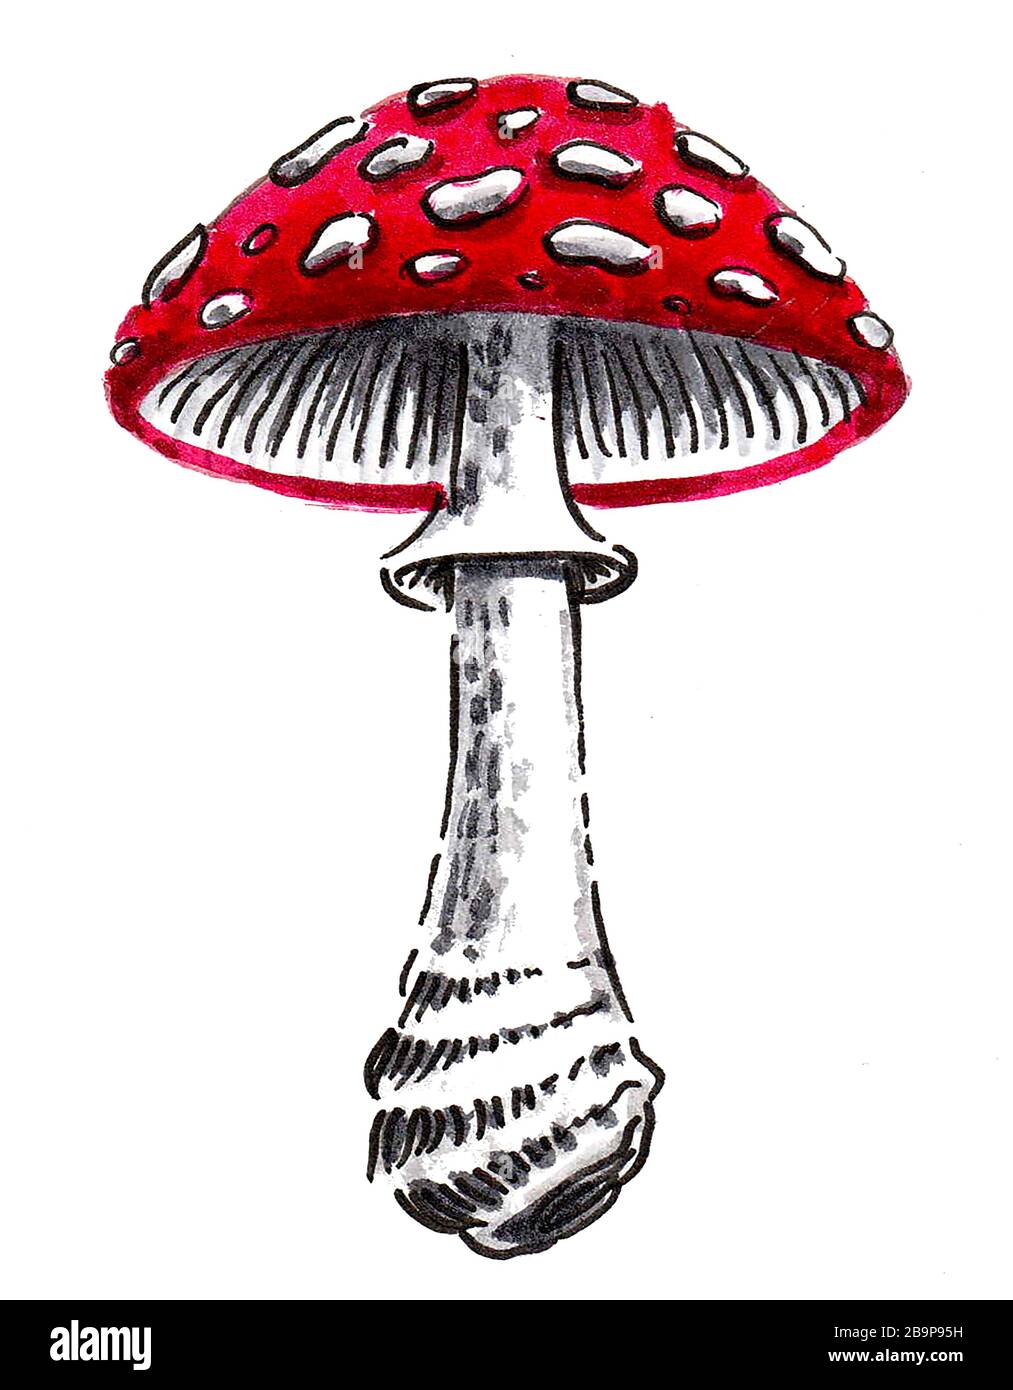 Fly Agaric mushroom. Ink and watercolor drawing Stock Photo